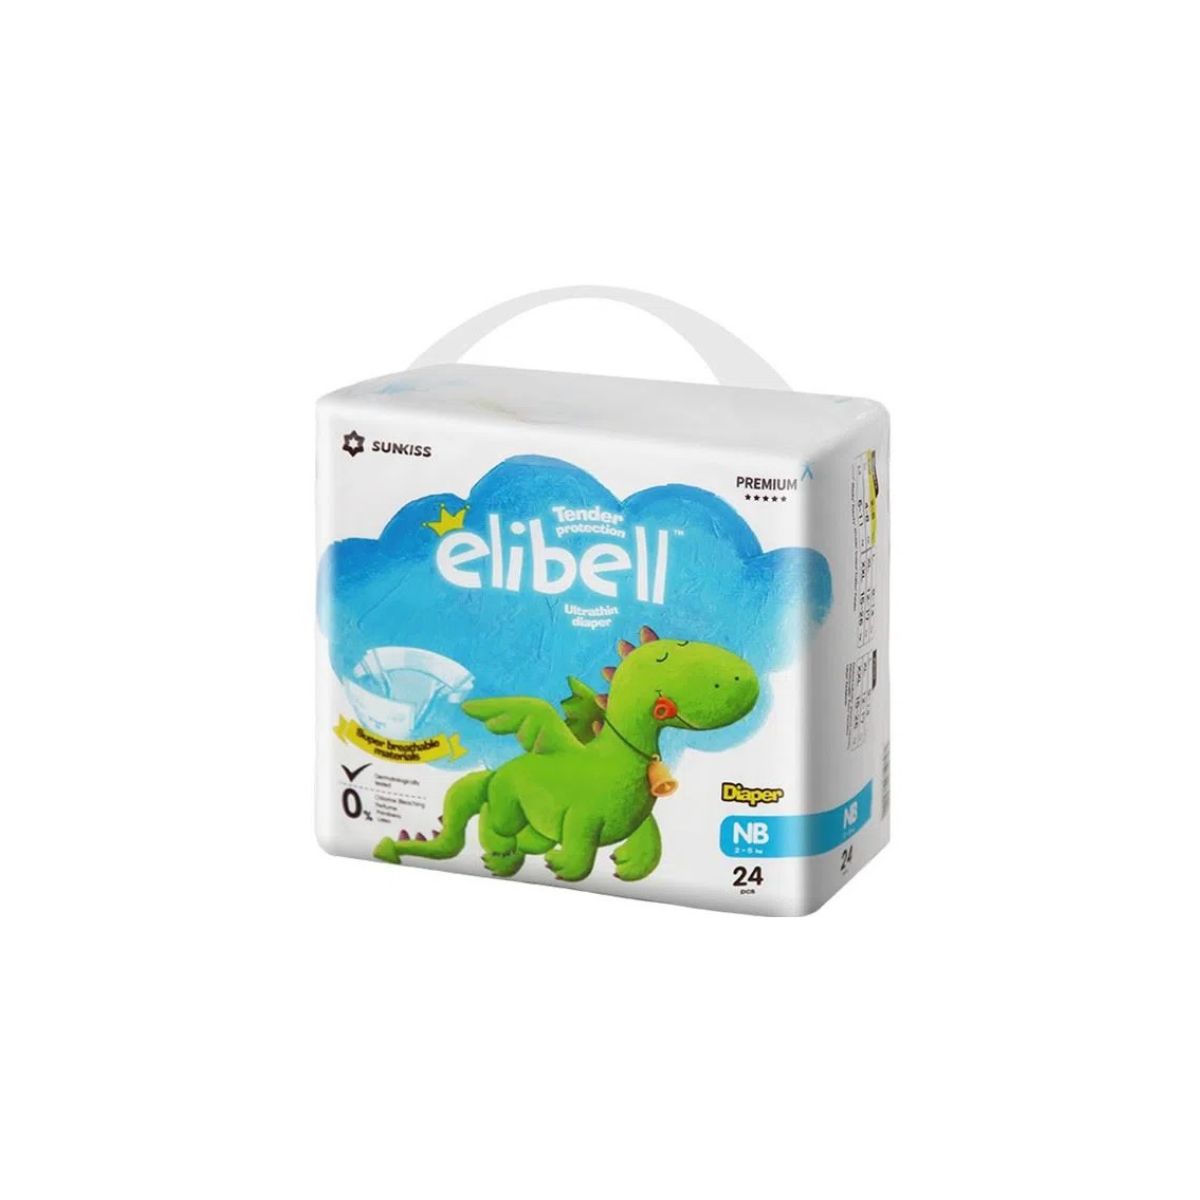 Elibell Baby Diaper - NB (2-5kg) - 24 Pcs | Free Delivery In Thimphu